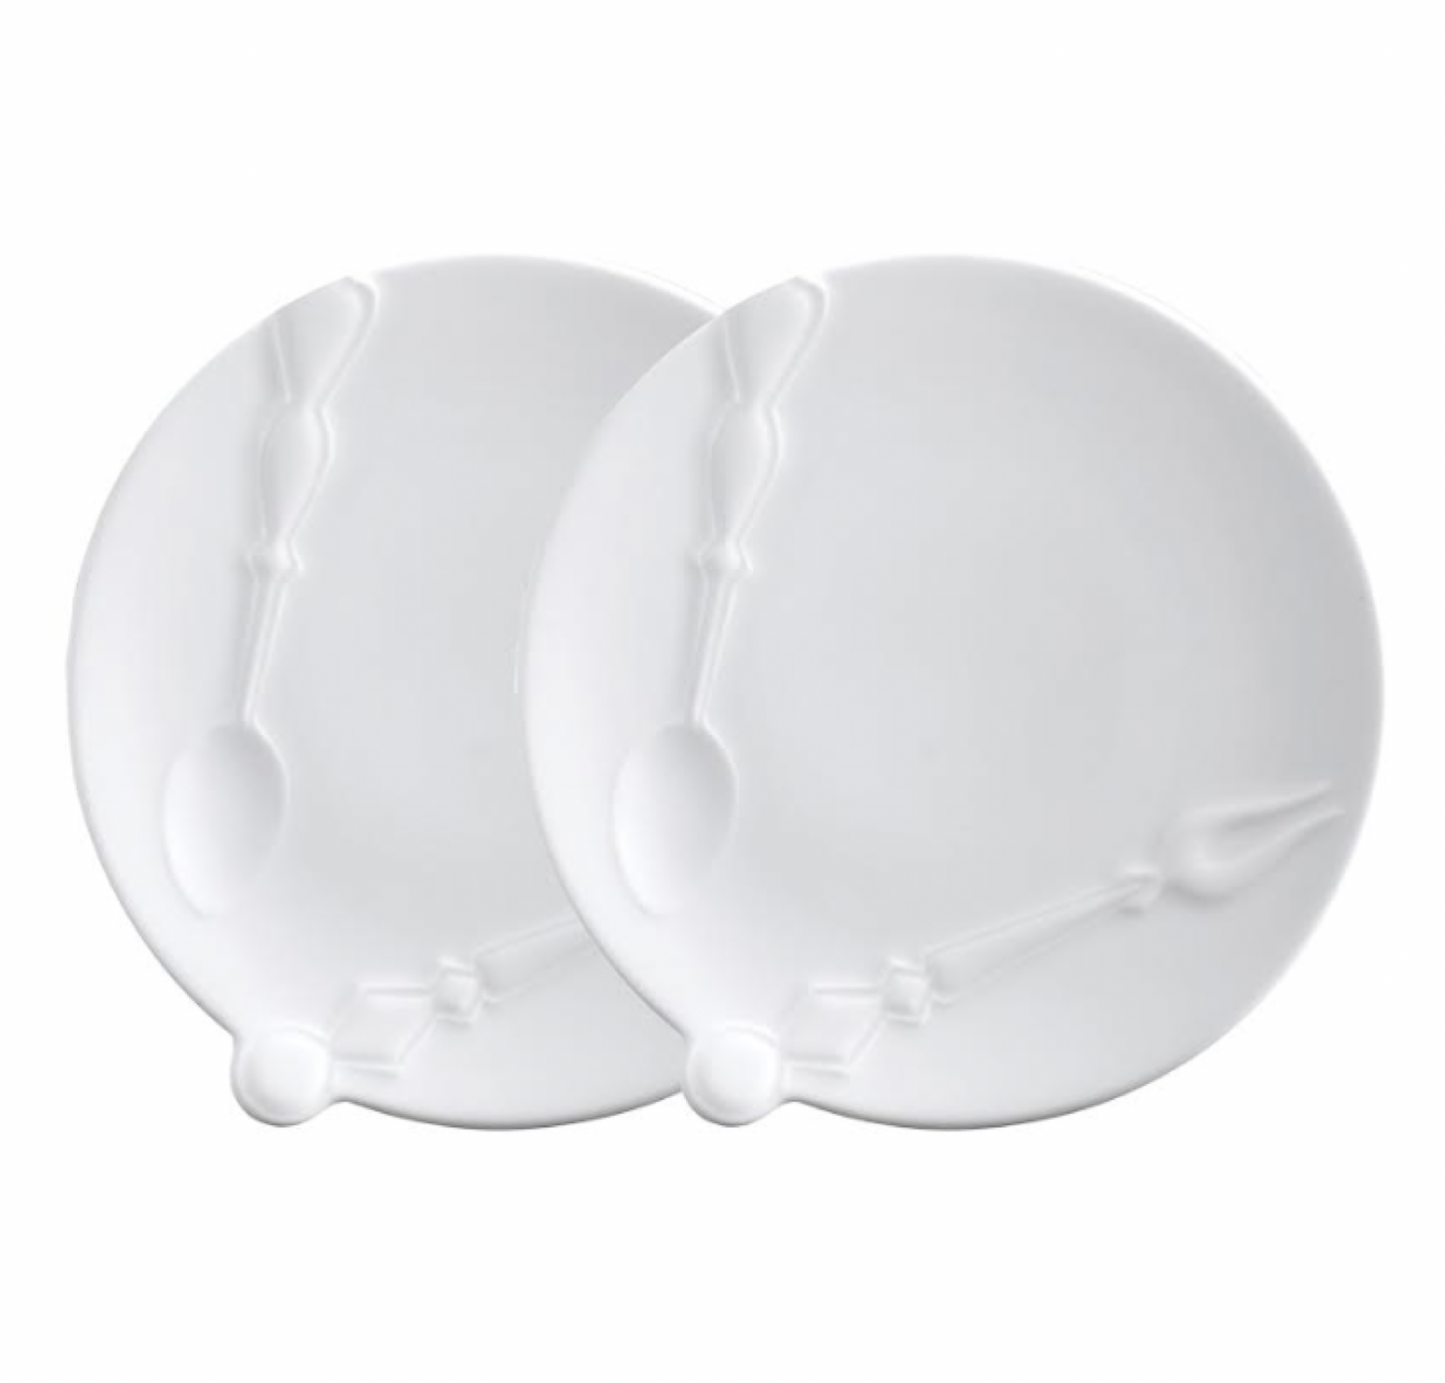 [Twig New York] Cutlery 7" Accent Plate set, 2pcs (A & B)